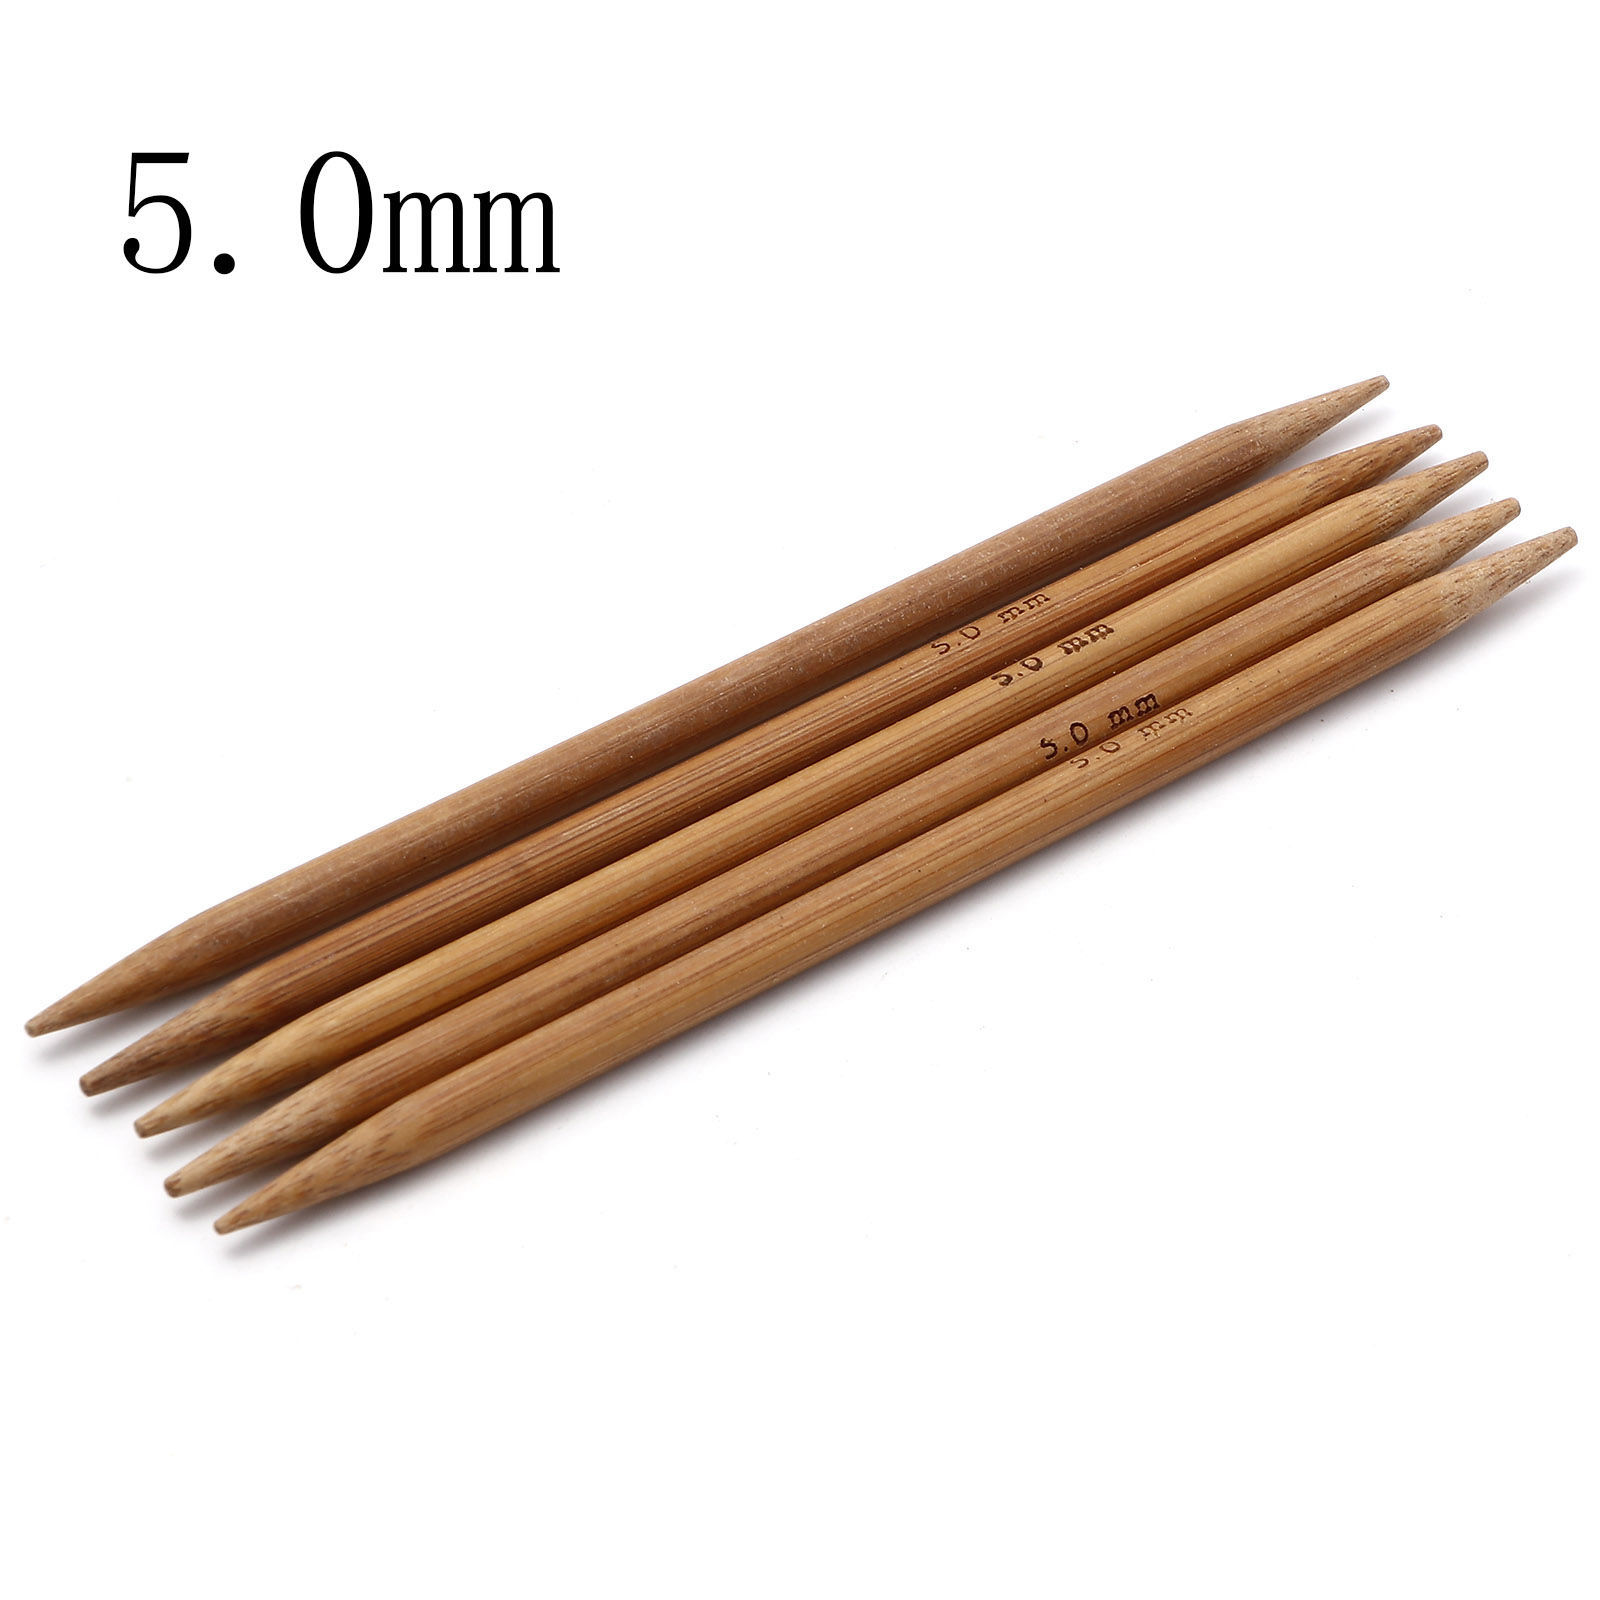 Picture of (US8 5.0mm) Bamboo Double Pointed Knitting Needles Brown 13cm(5 1/8") long, 5 PCs